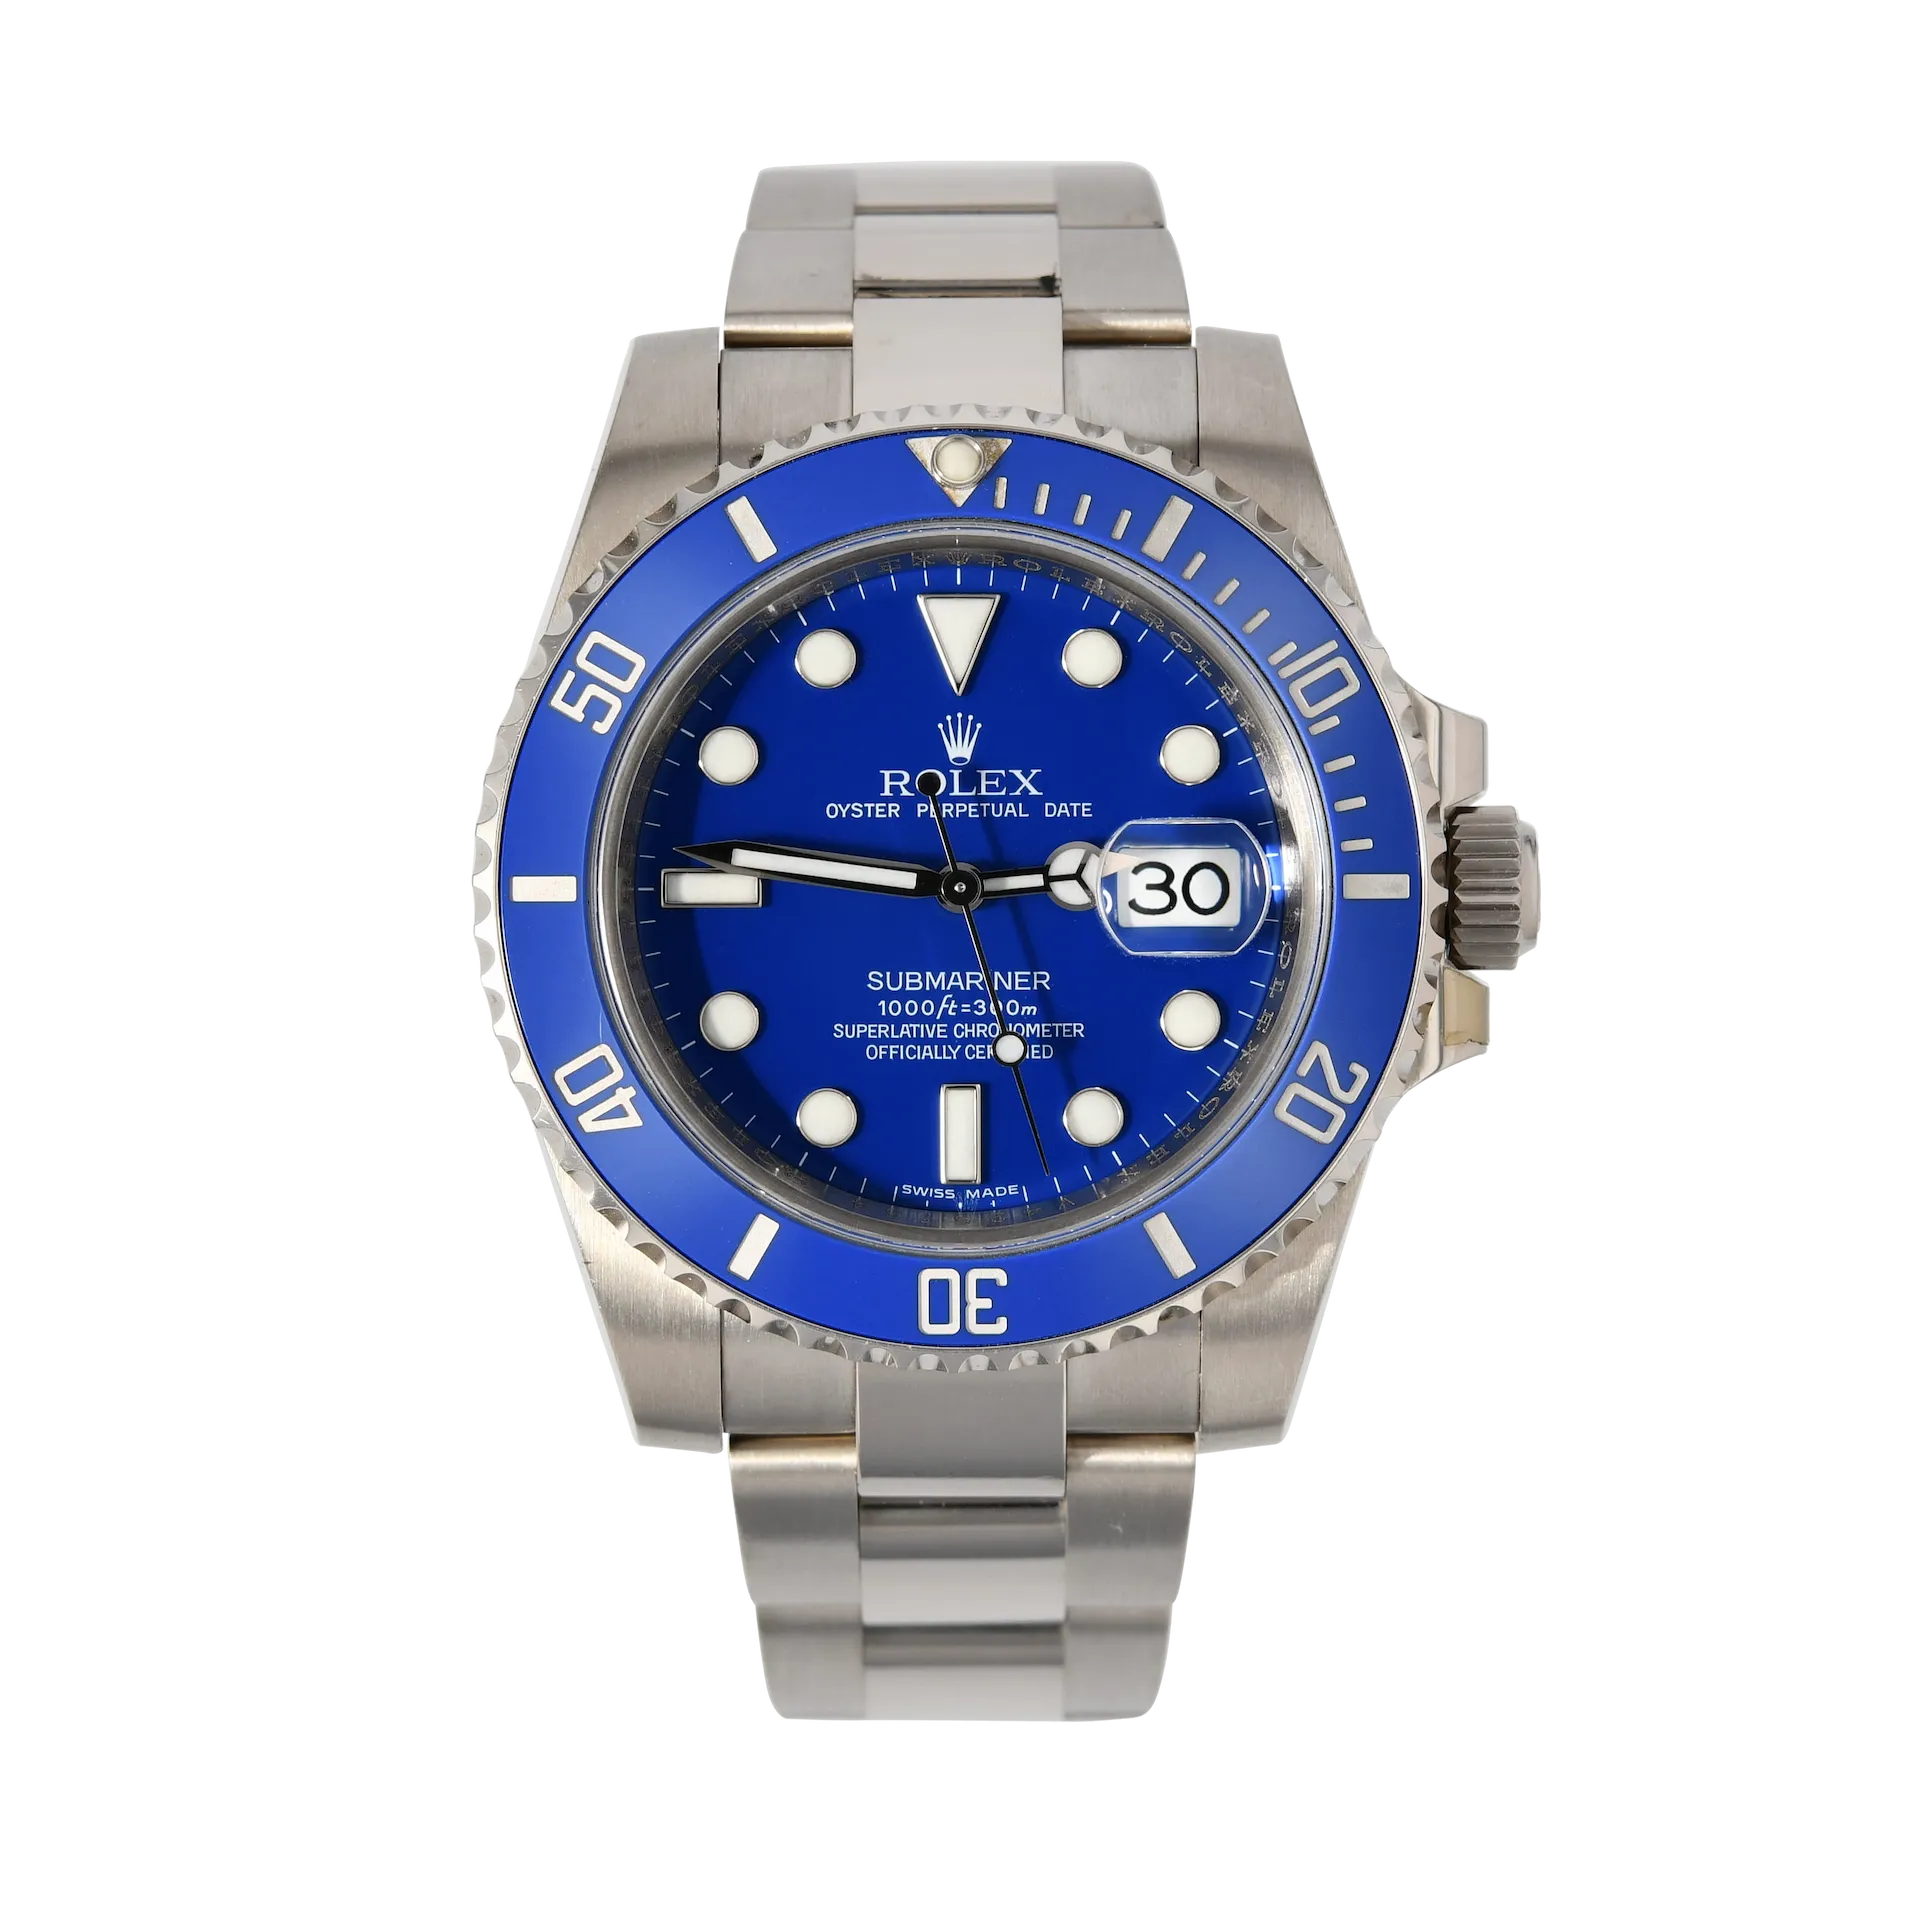 Rolex Submariner 116619LB 48mm Stainless steel Blue